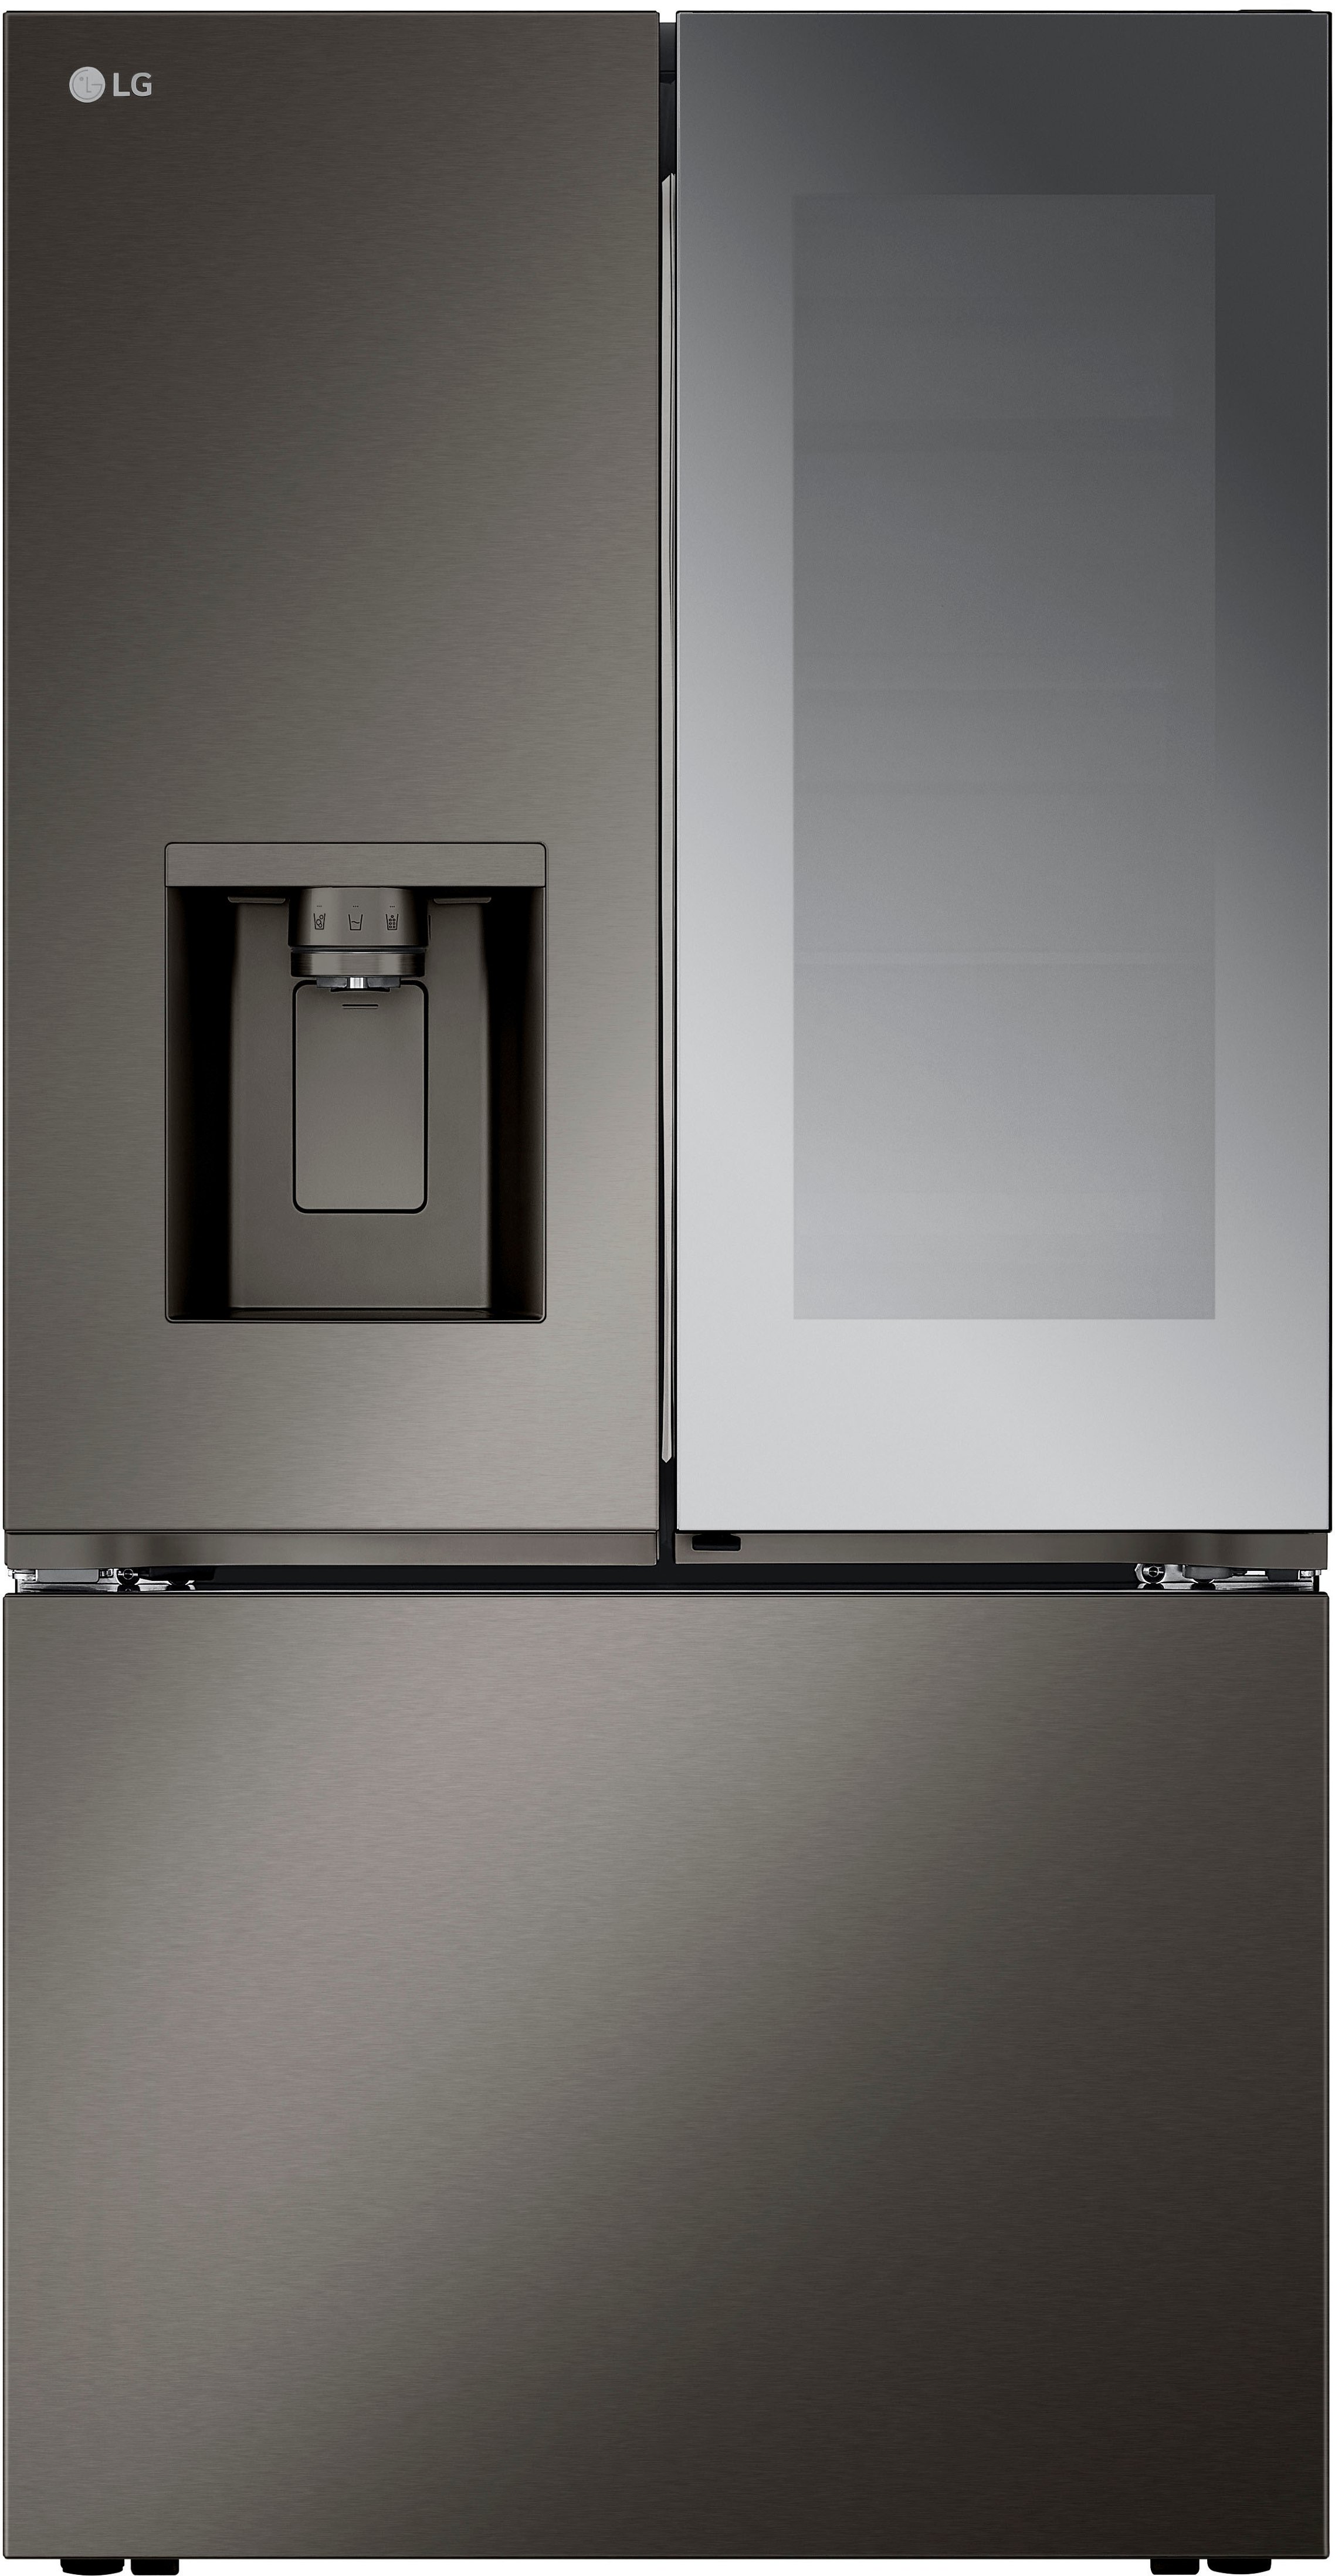 My Honest Review on the New Luxury GE Café Appliances Refrigerator